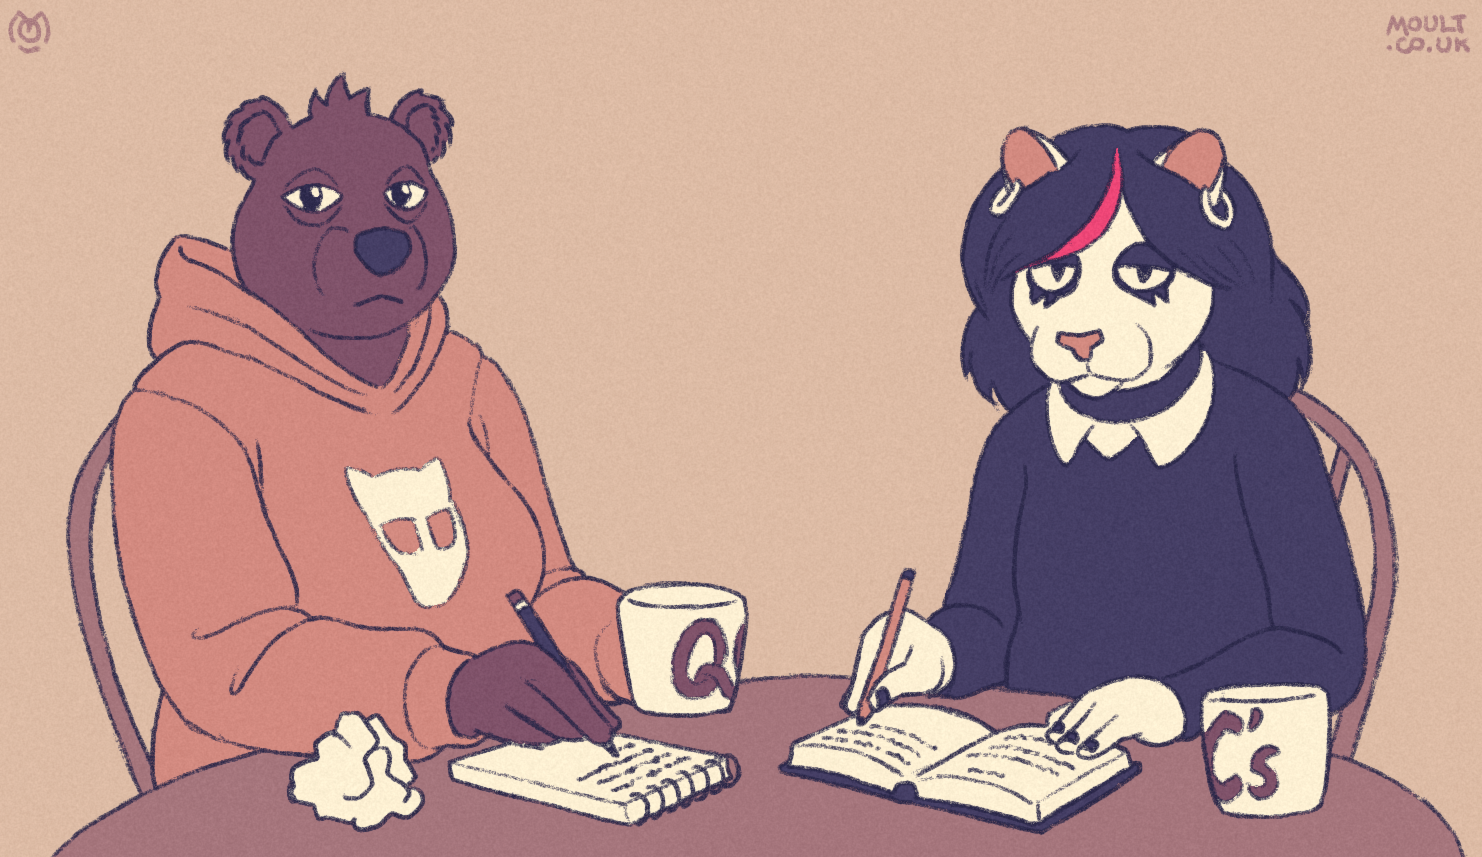 selmers from night in the woods and catti from deltarune at a poetry-writing meetup in a cafe